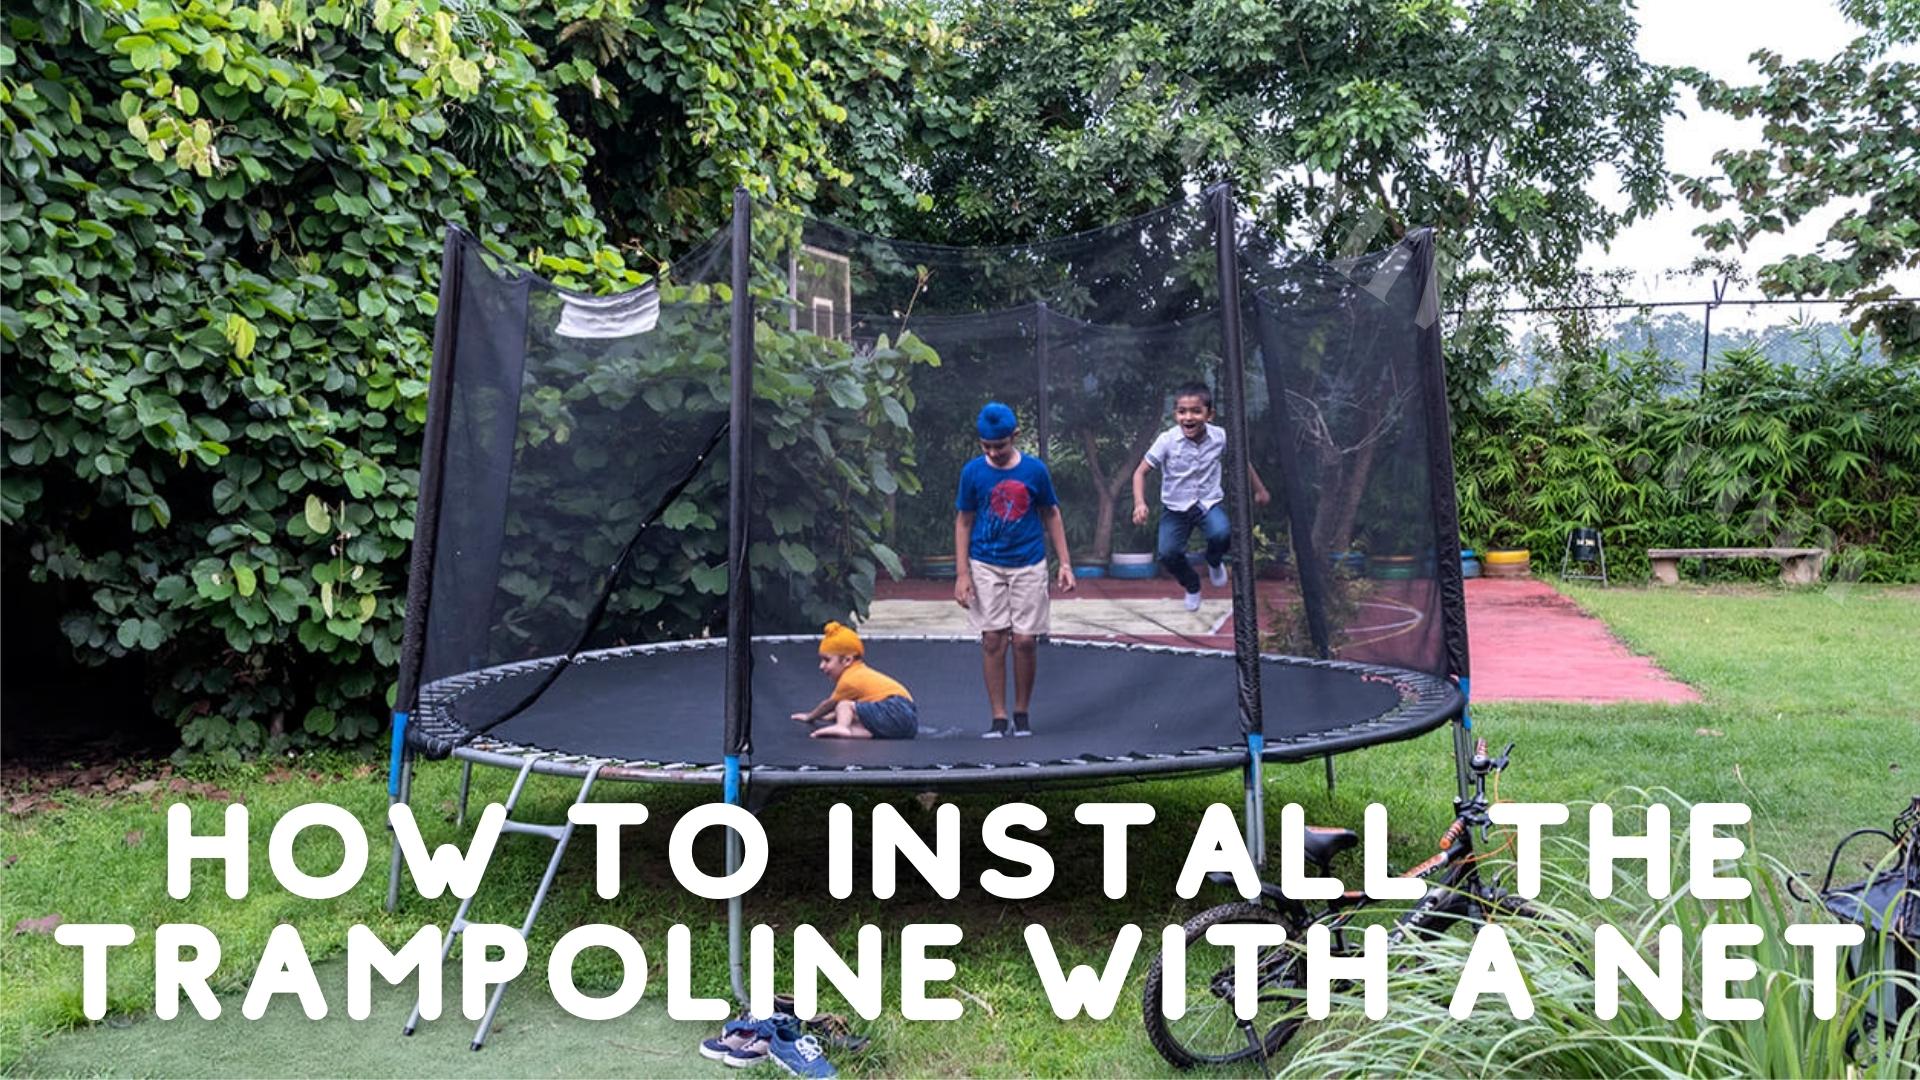 Trampoline With a Net